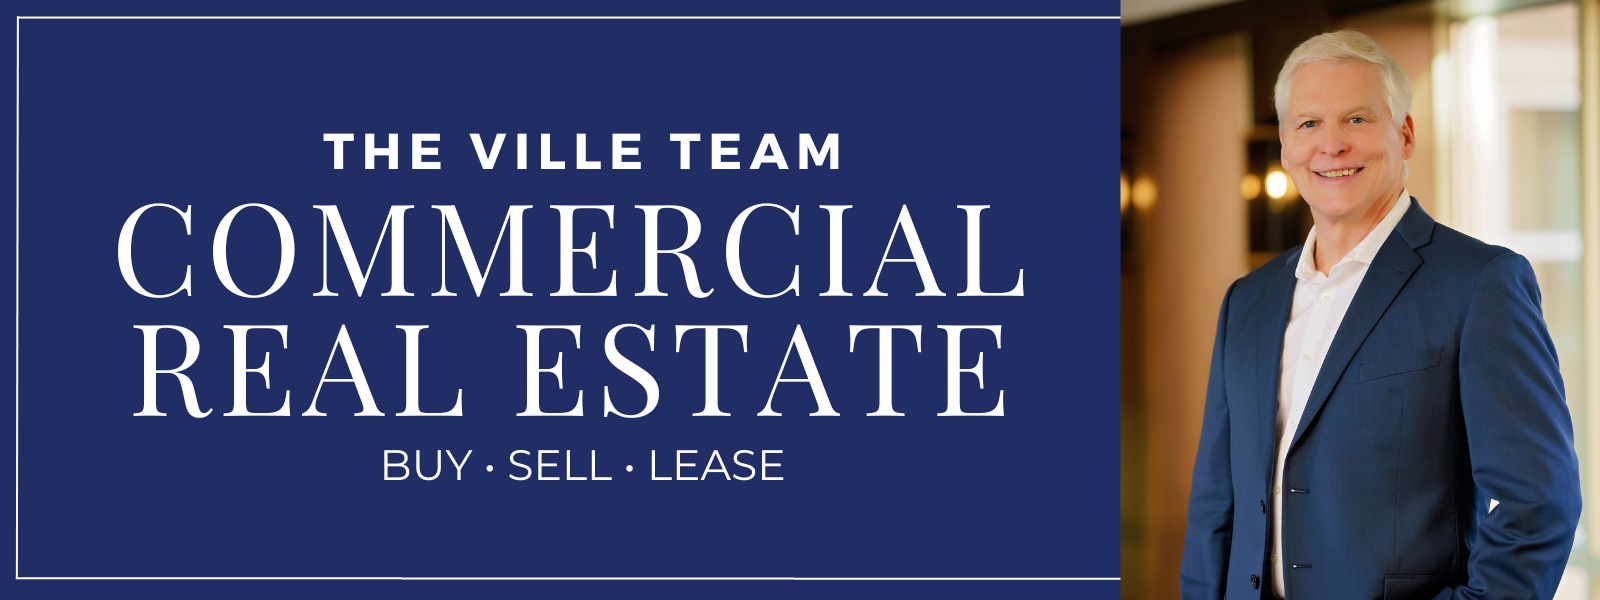 The Ville Team Commercial Real Estate Agents | buy, sell or lease commercial properties with The Ville in Naperville, Illinois | real estate team | coldwell banker realty